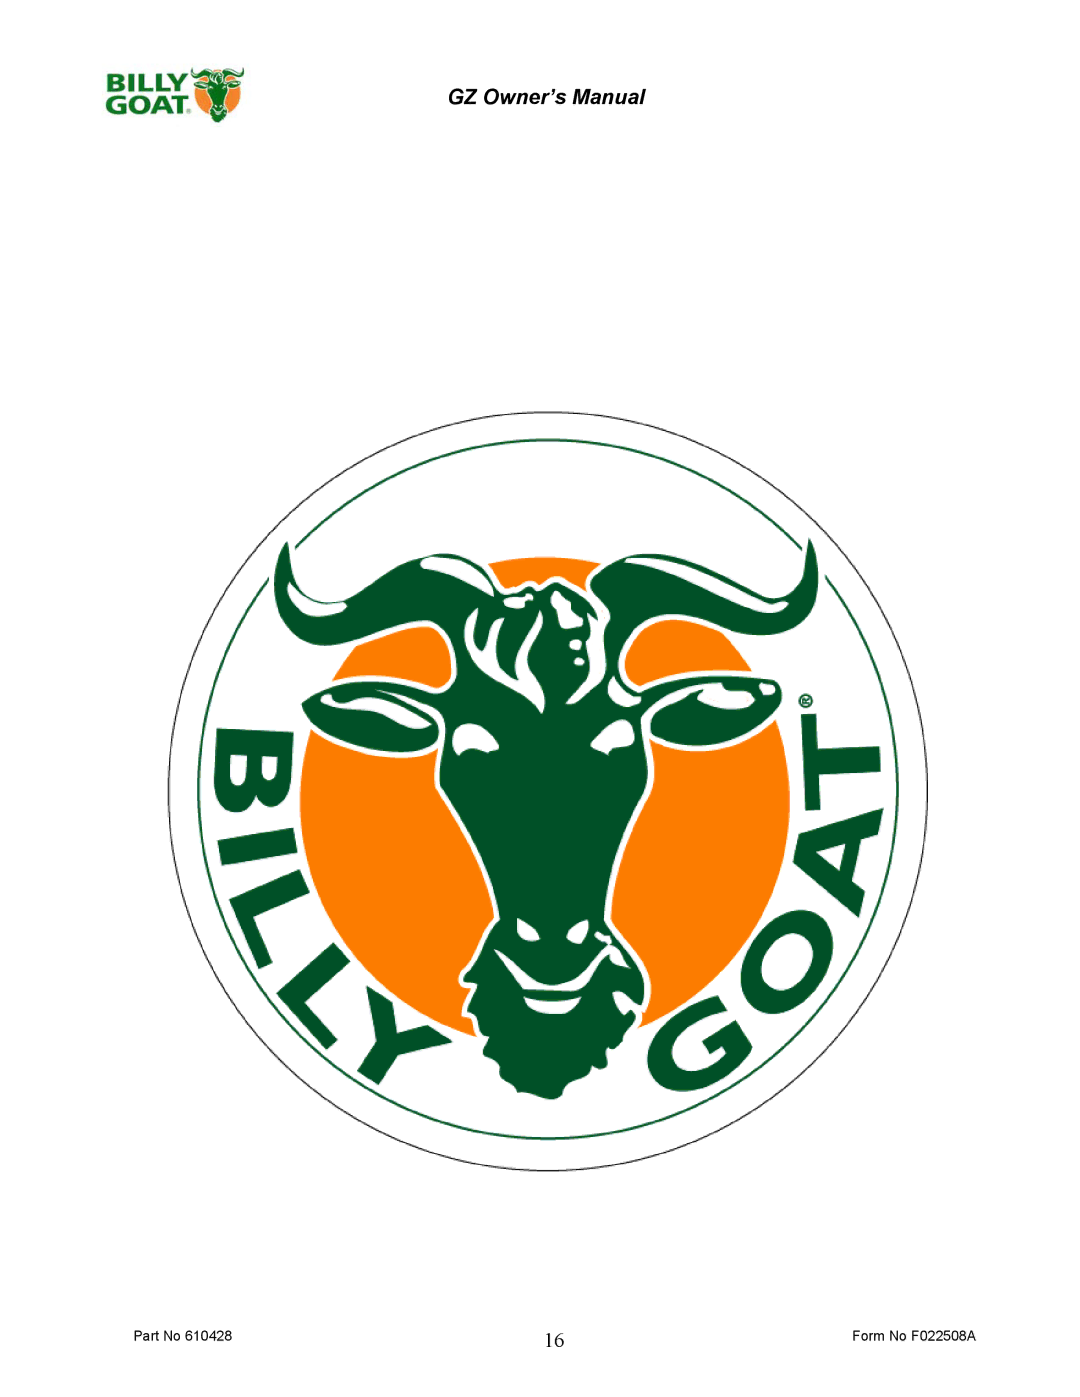 Billy Goat GZ401H, GZ451S owner manual Form No F022508A 